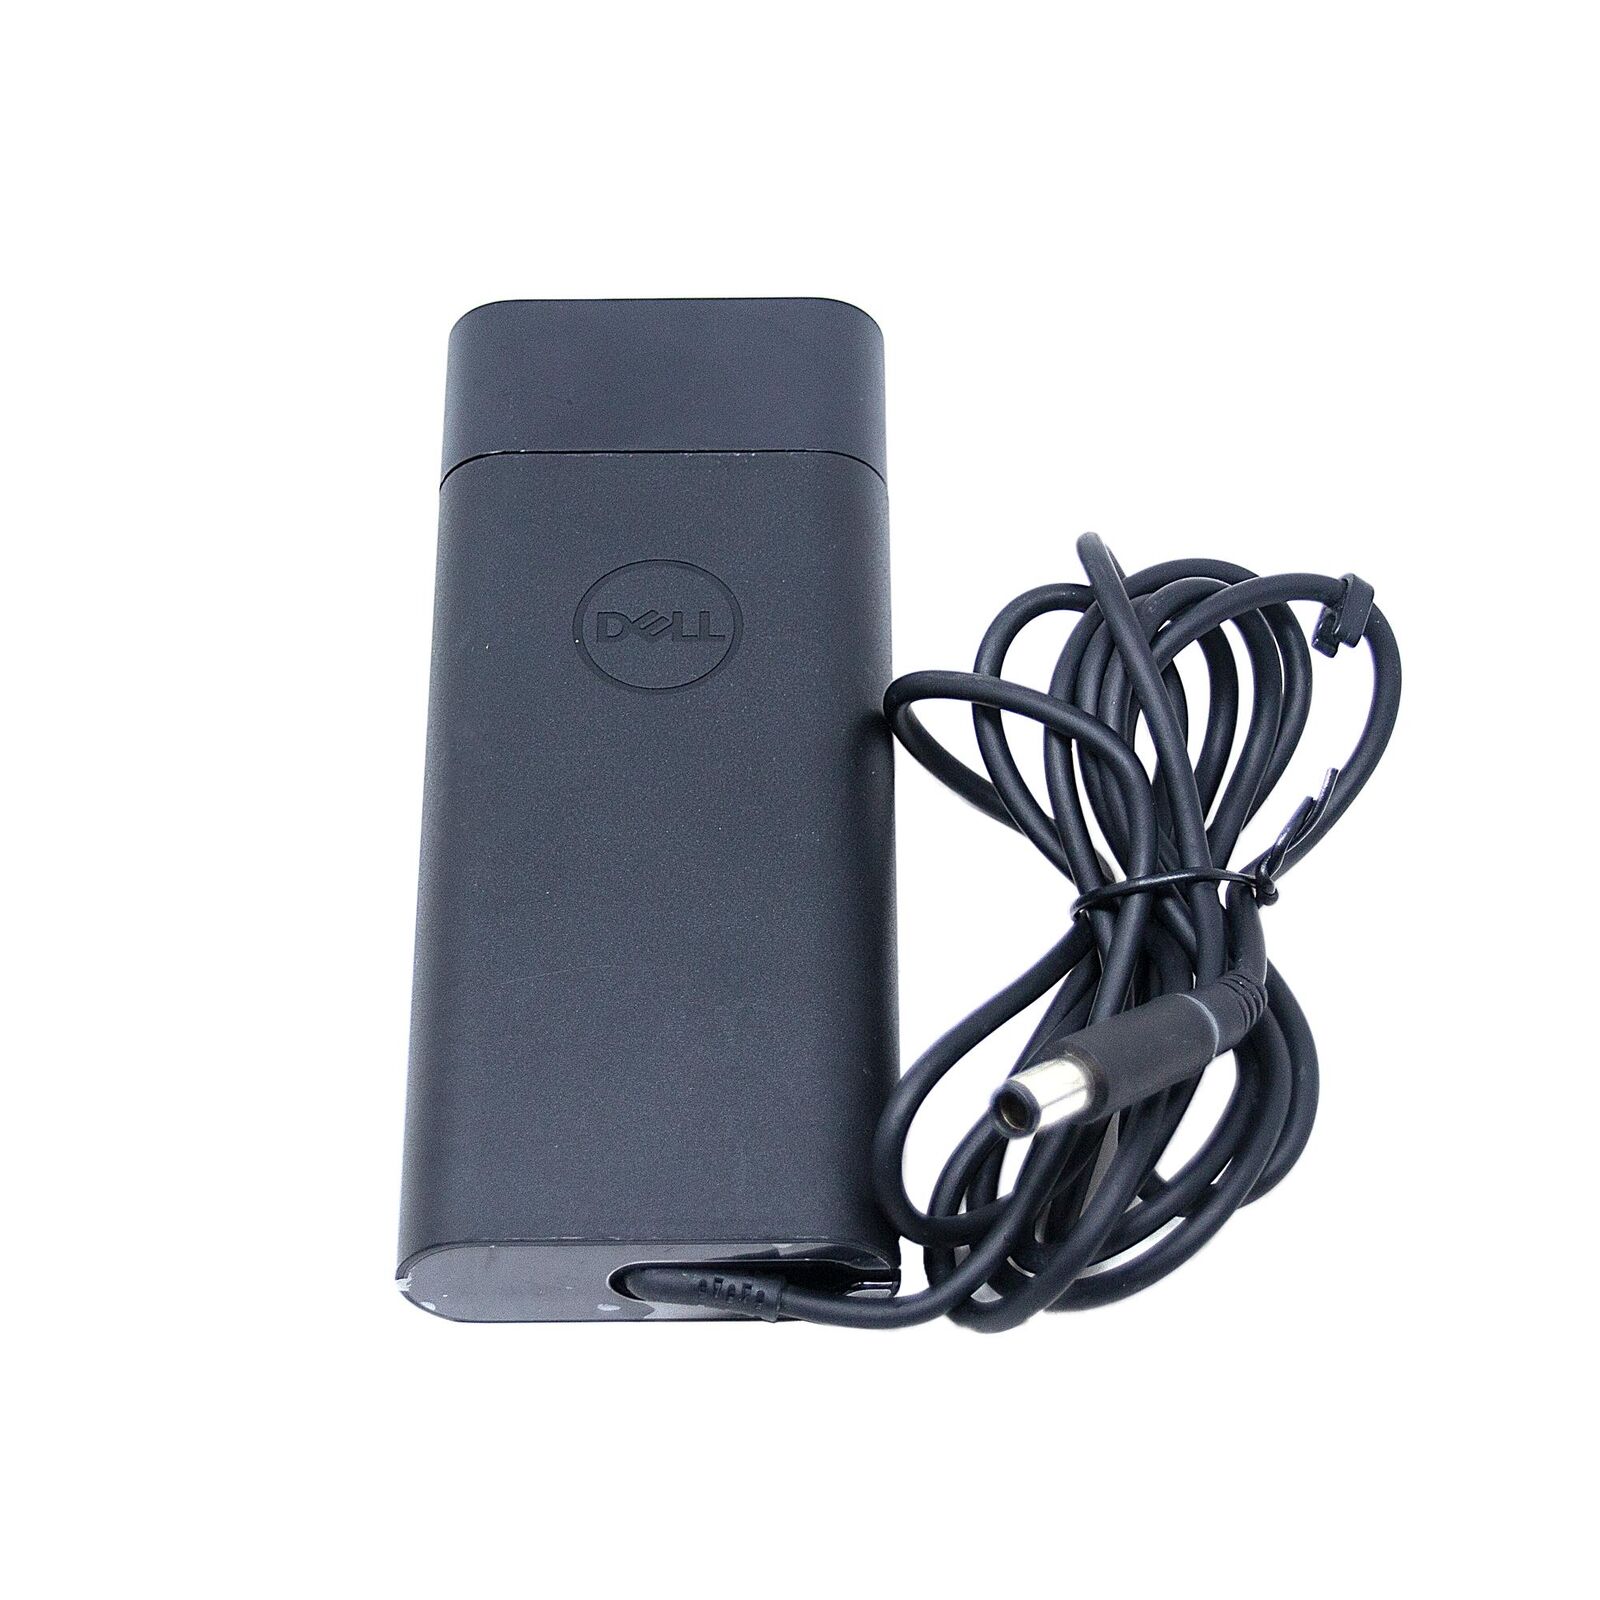 DELL XPS M1330 PP25L Genuine Original AC Power Adapter Charger